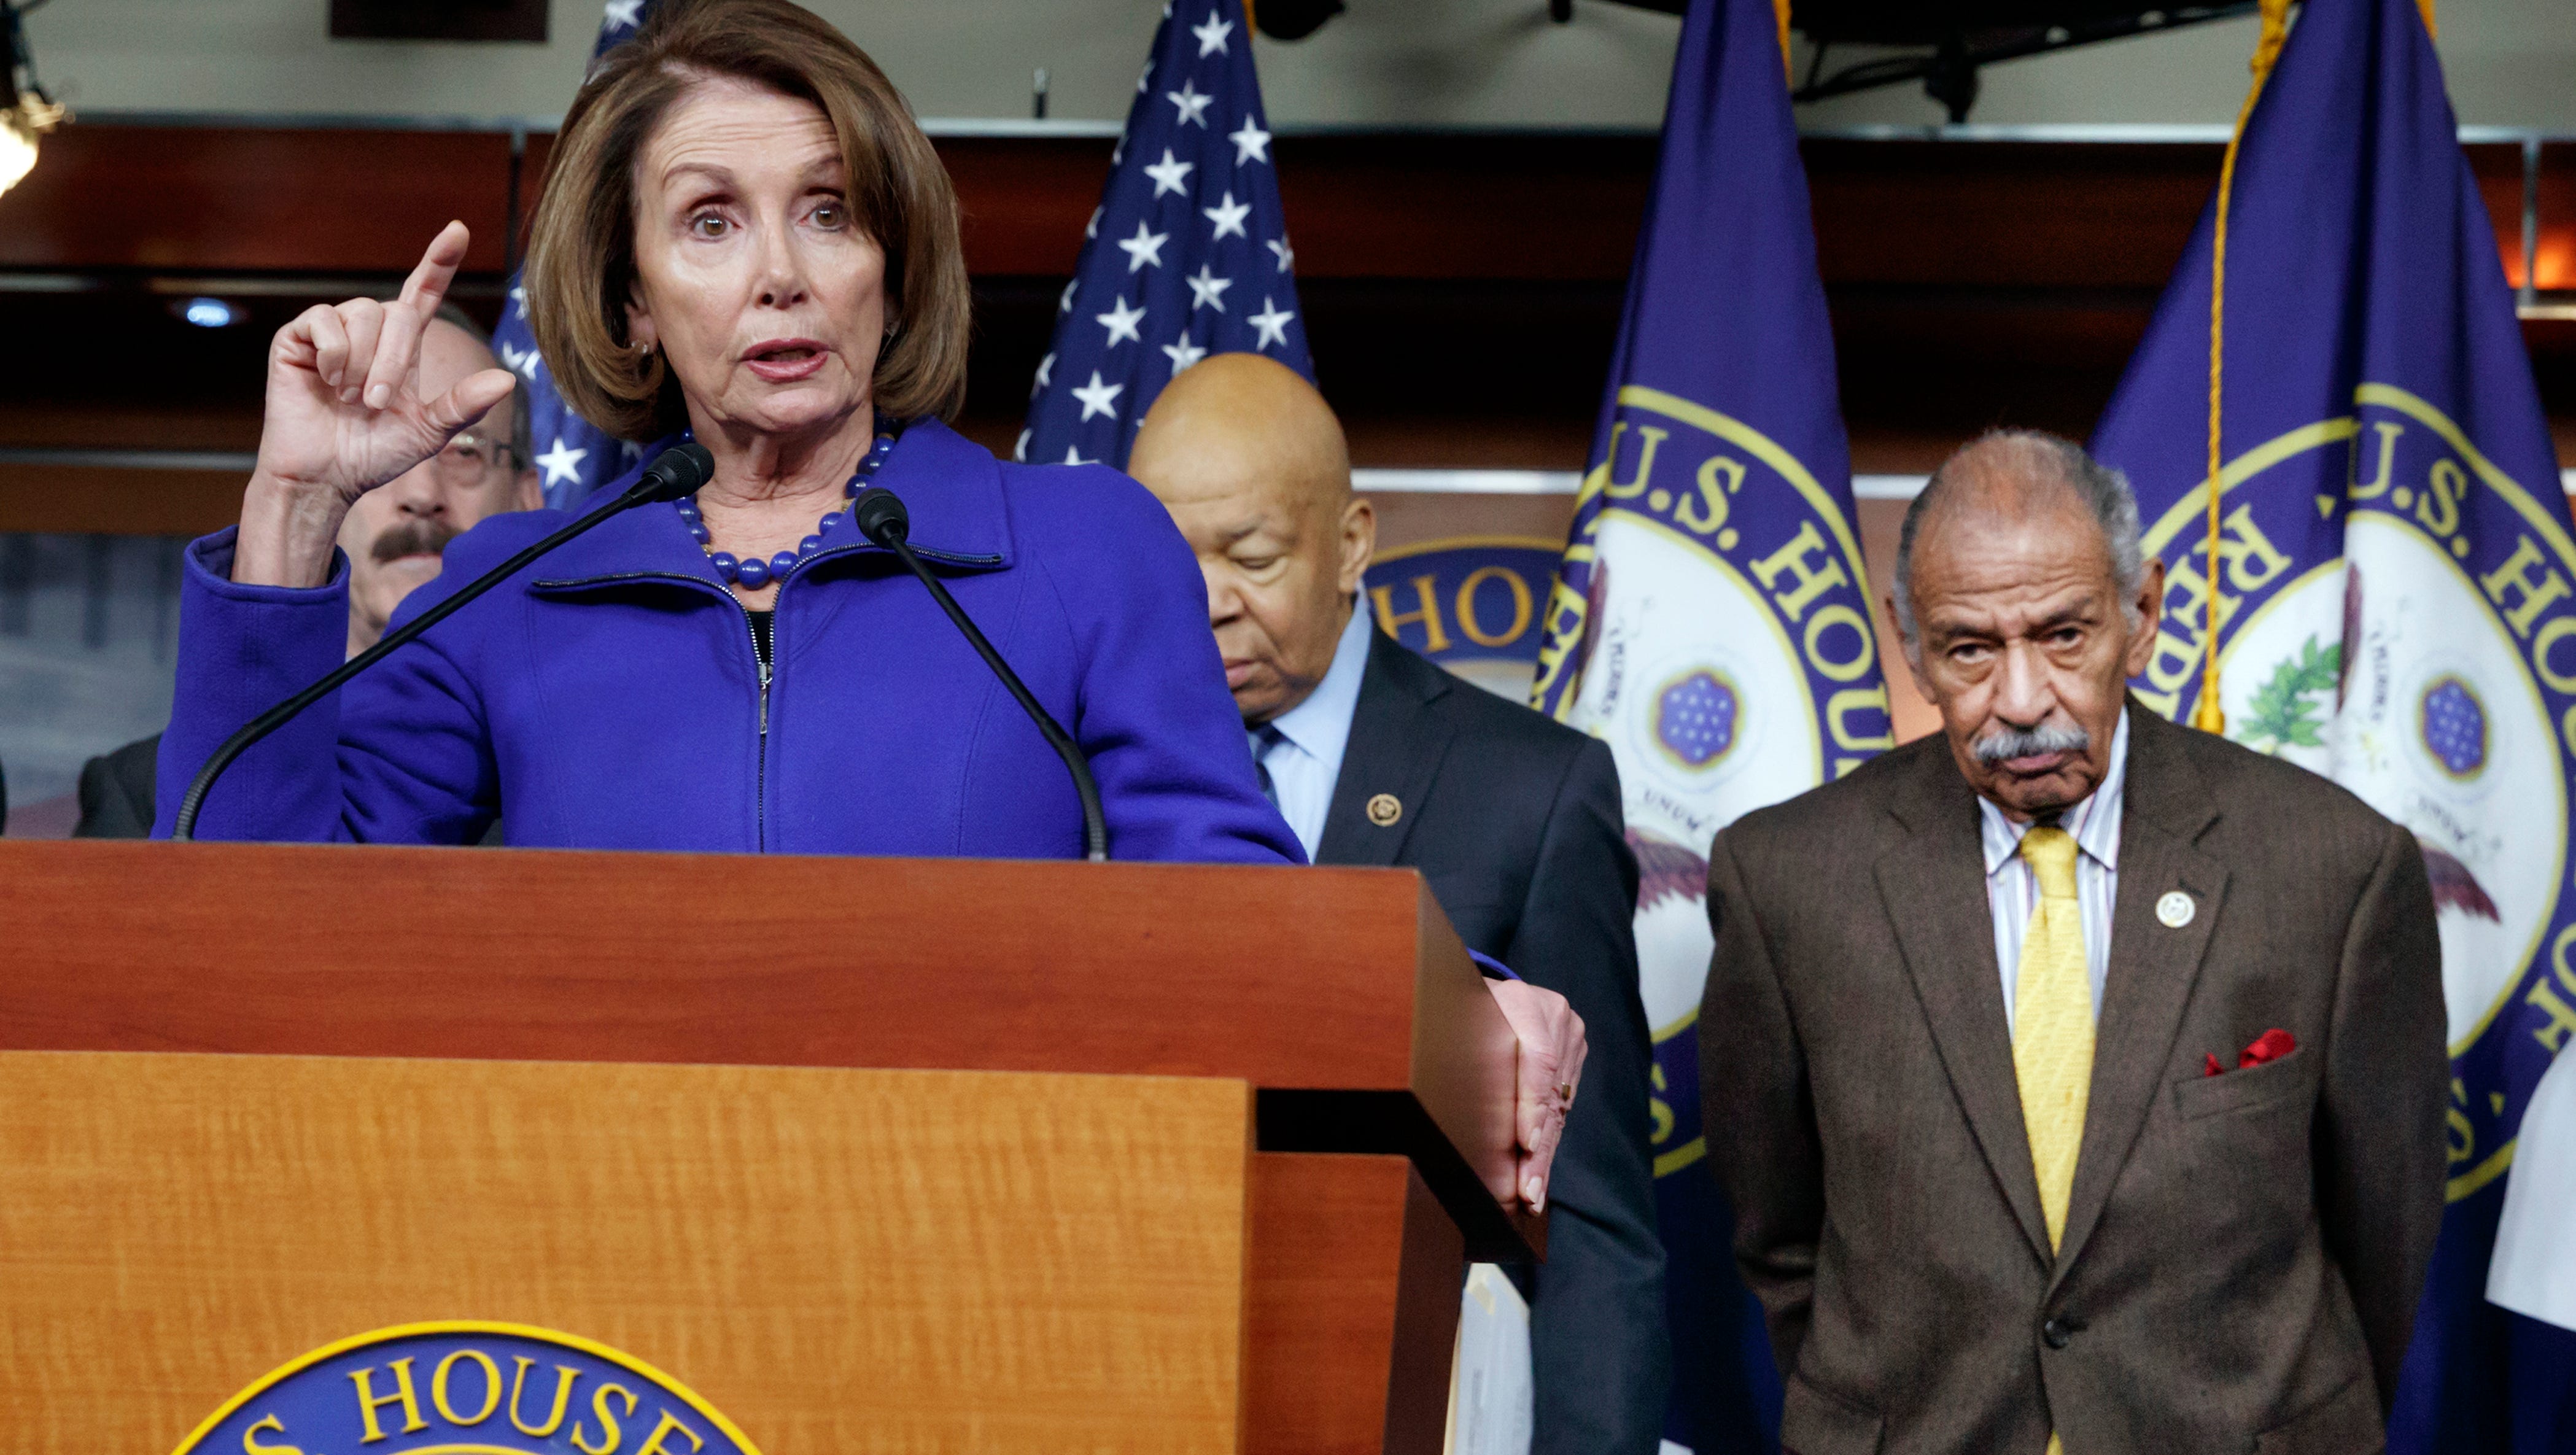 On Nov. 30, 2017, House Minority Leader Nancy Pelosi, seen earlier in the year, calls on Conyers to resign.  “As dean, Congressman Conyers has served our Congress for more than five decades and shaped some of the most consequential legislation of the last half century,” Pelosi said. “However … the legacy is no license to harass or discriminate. In fact, it makes it even more disappointing.”